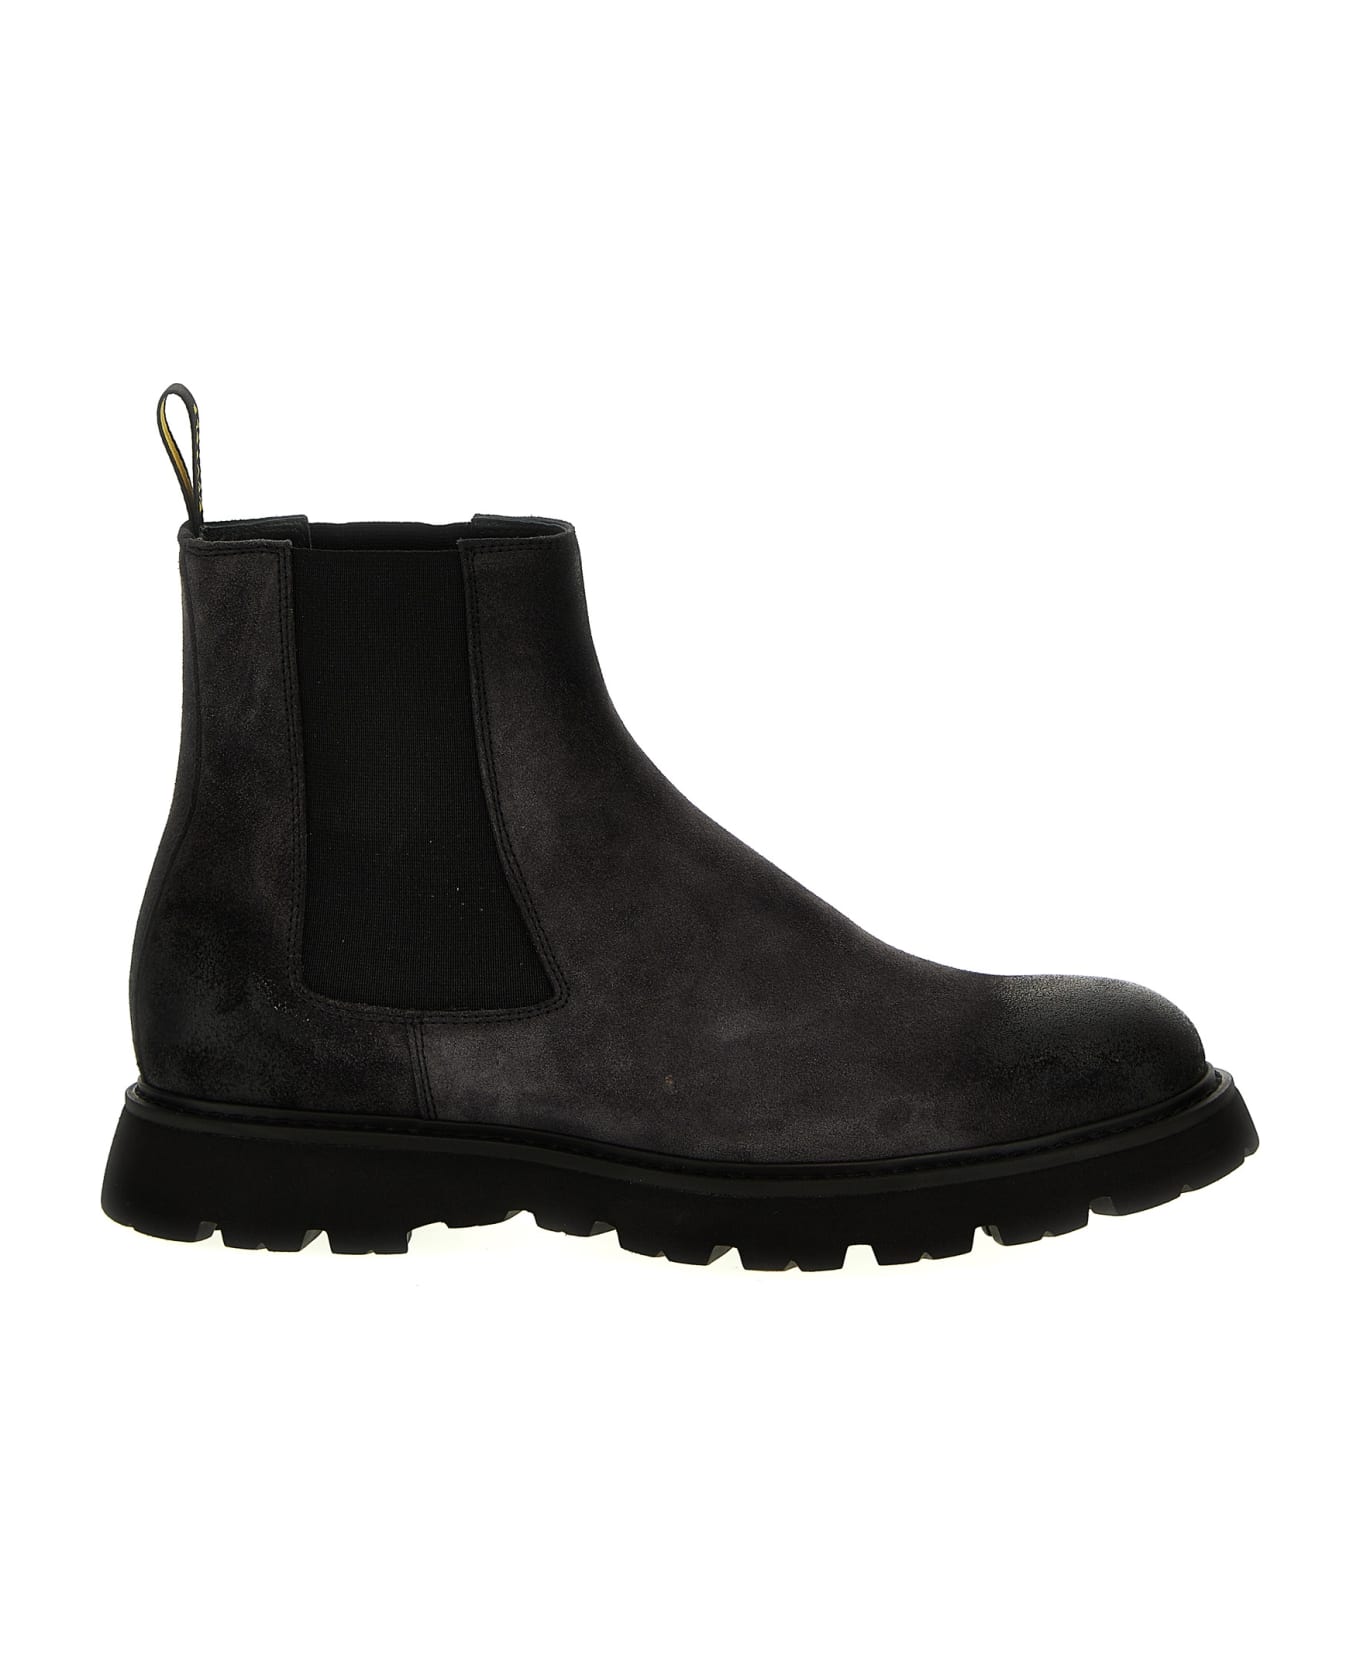 Doucal's Crust Chelsea Boots - ANTHRACITE